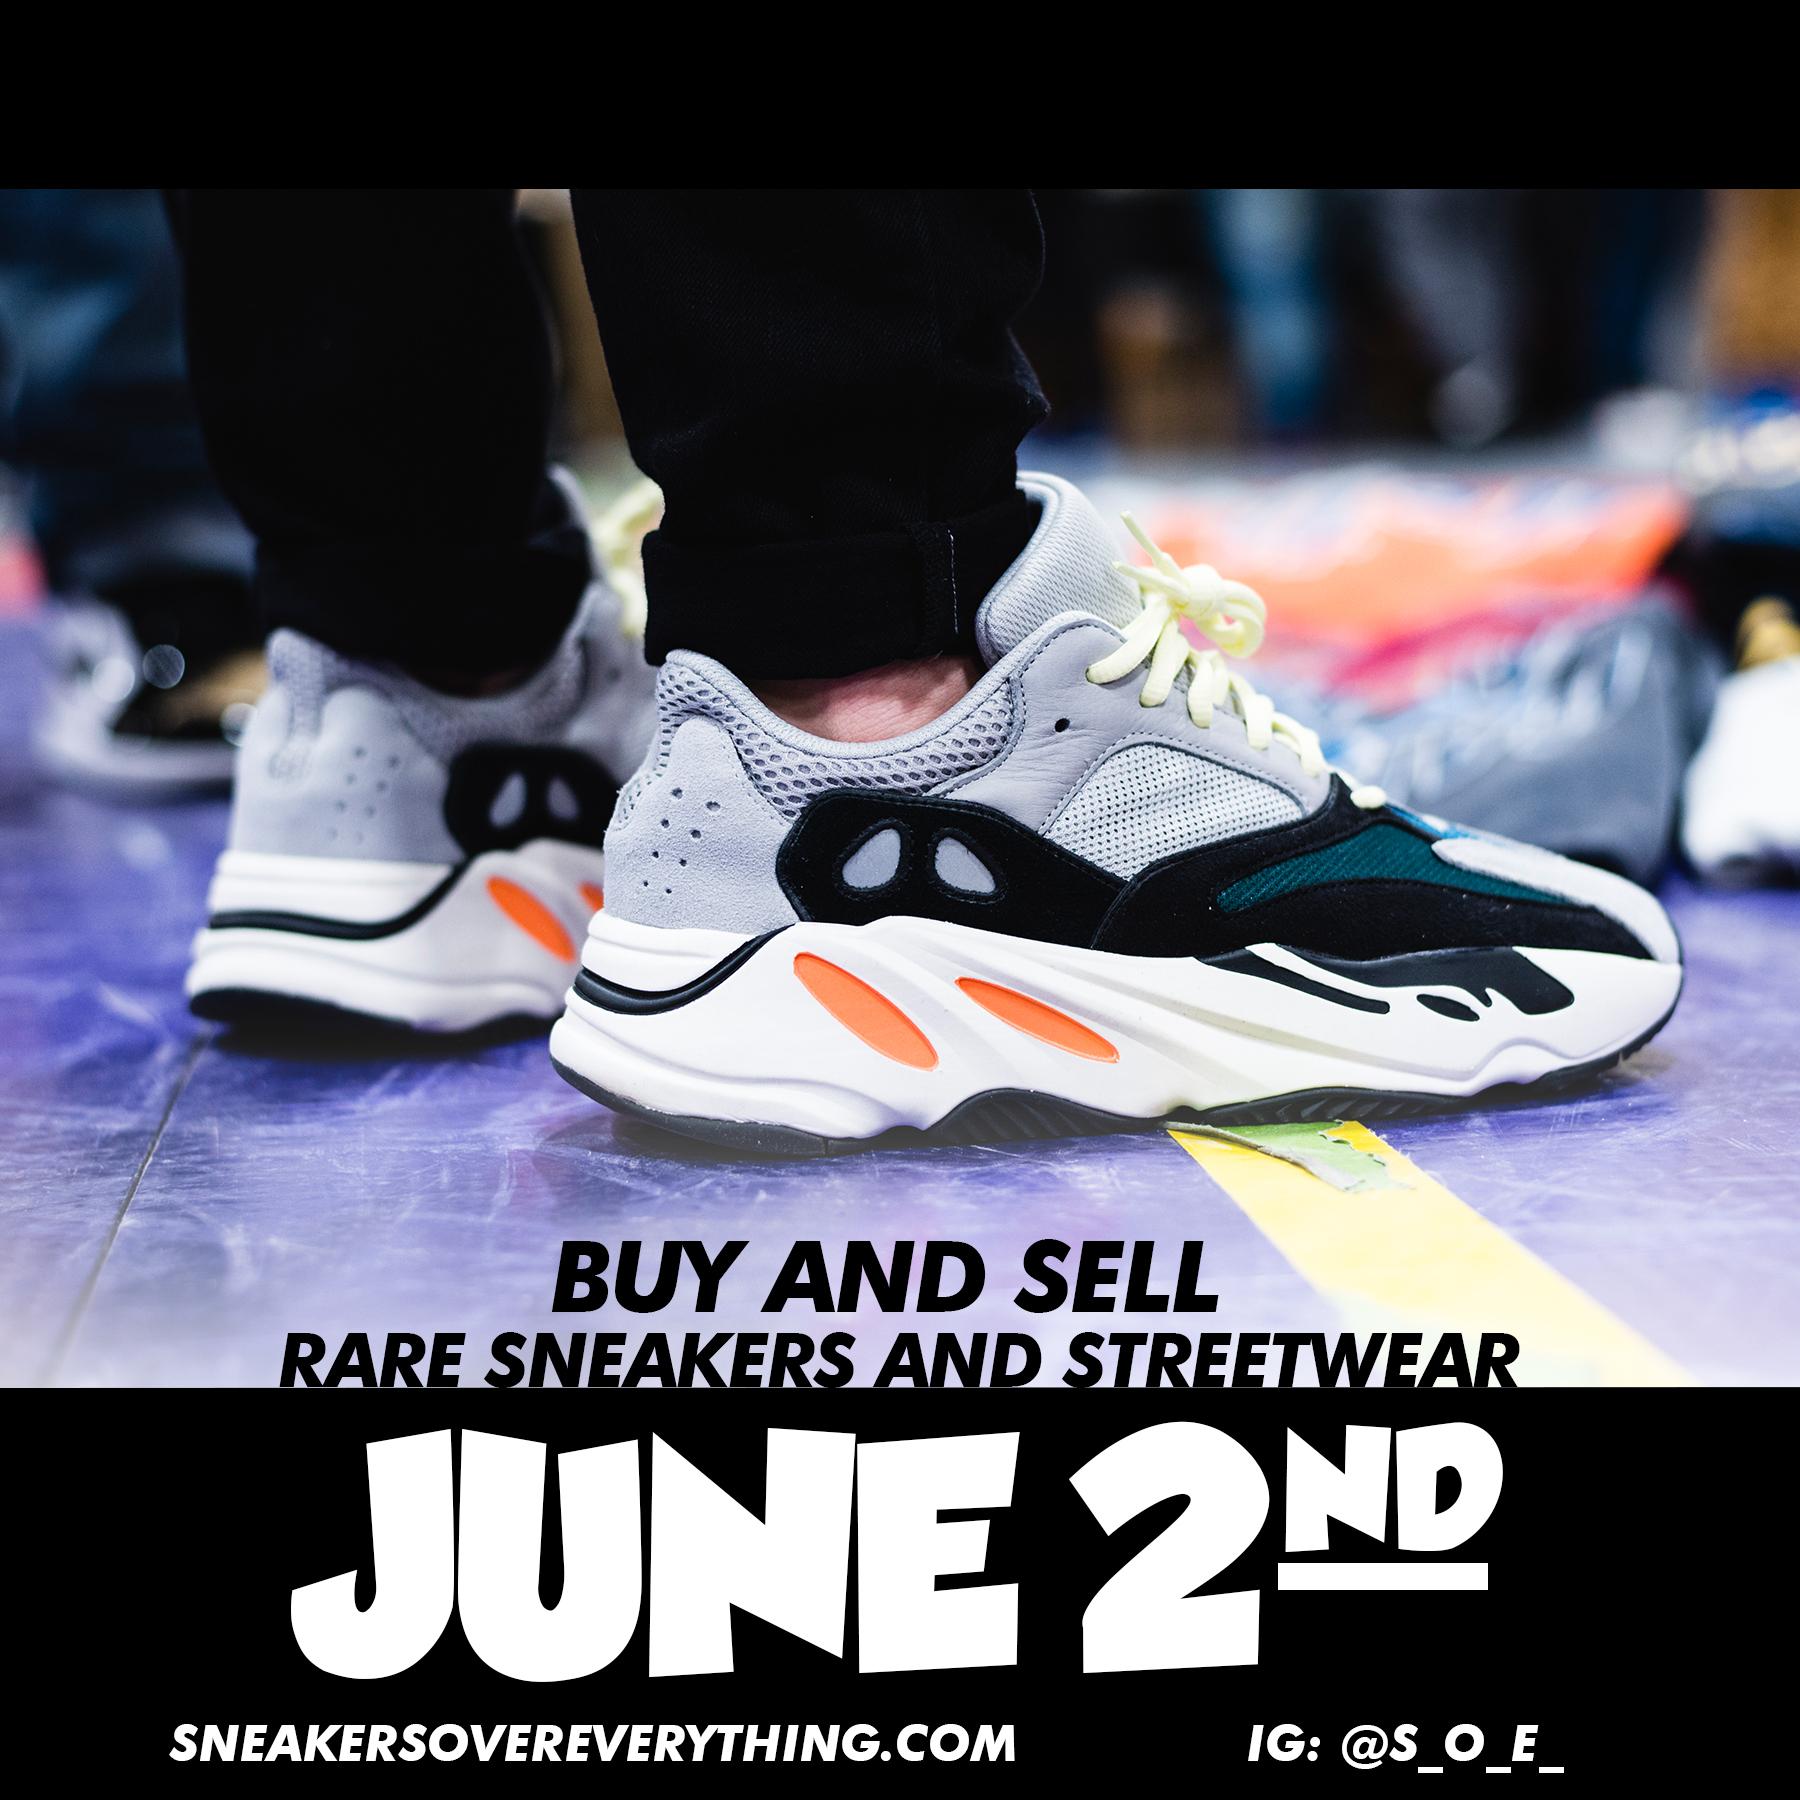 Sneakers Over Everything - February 22, 2020